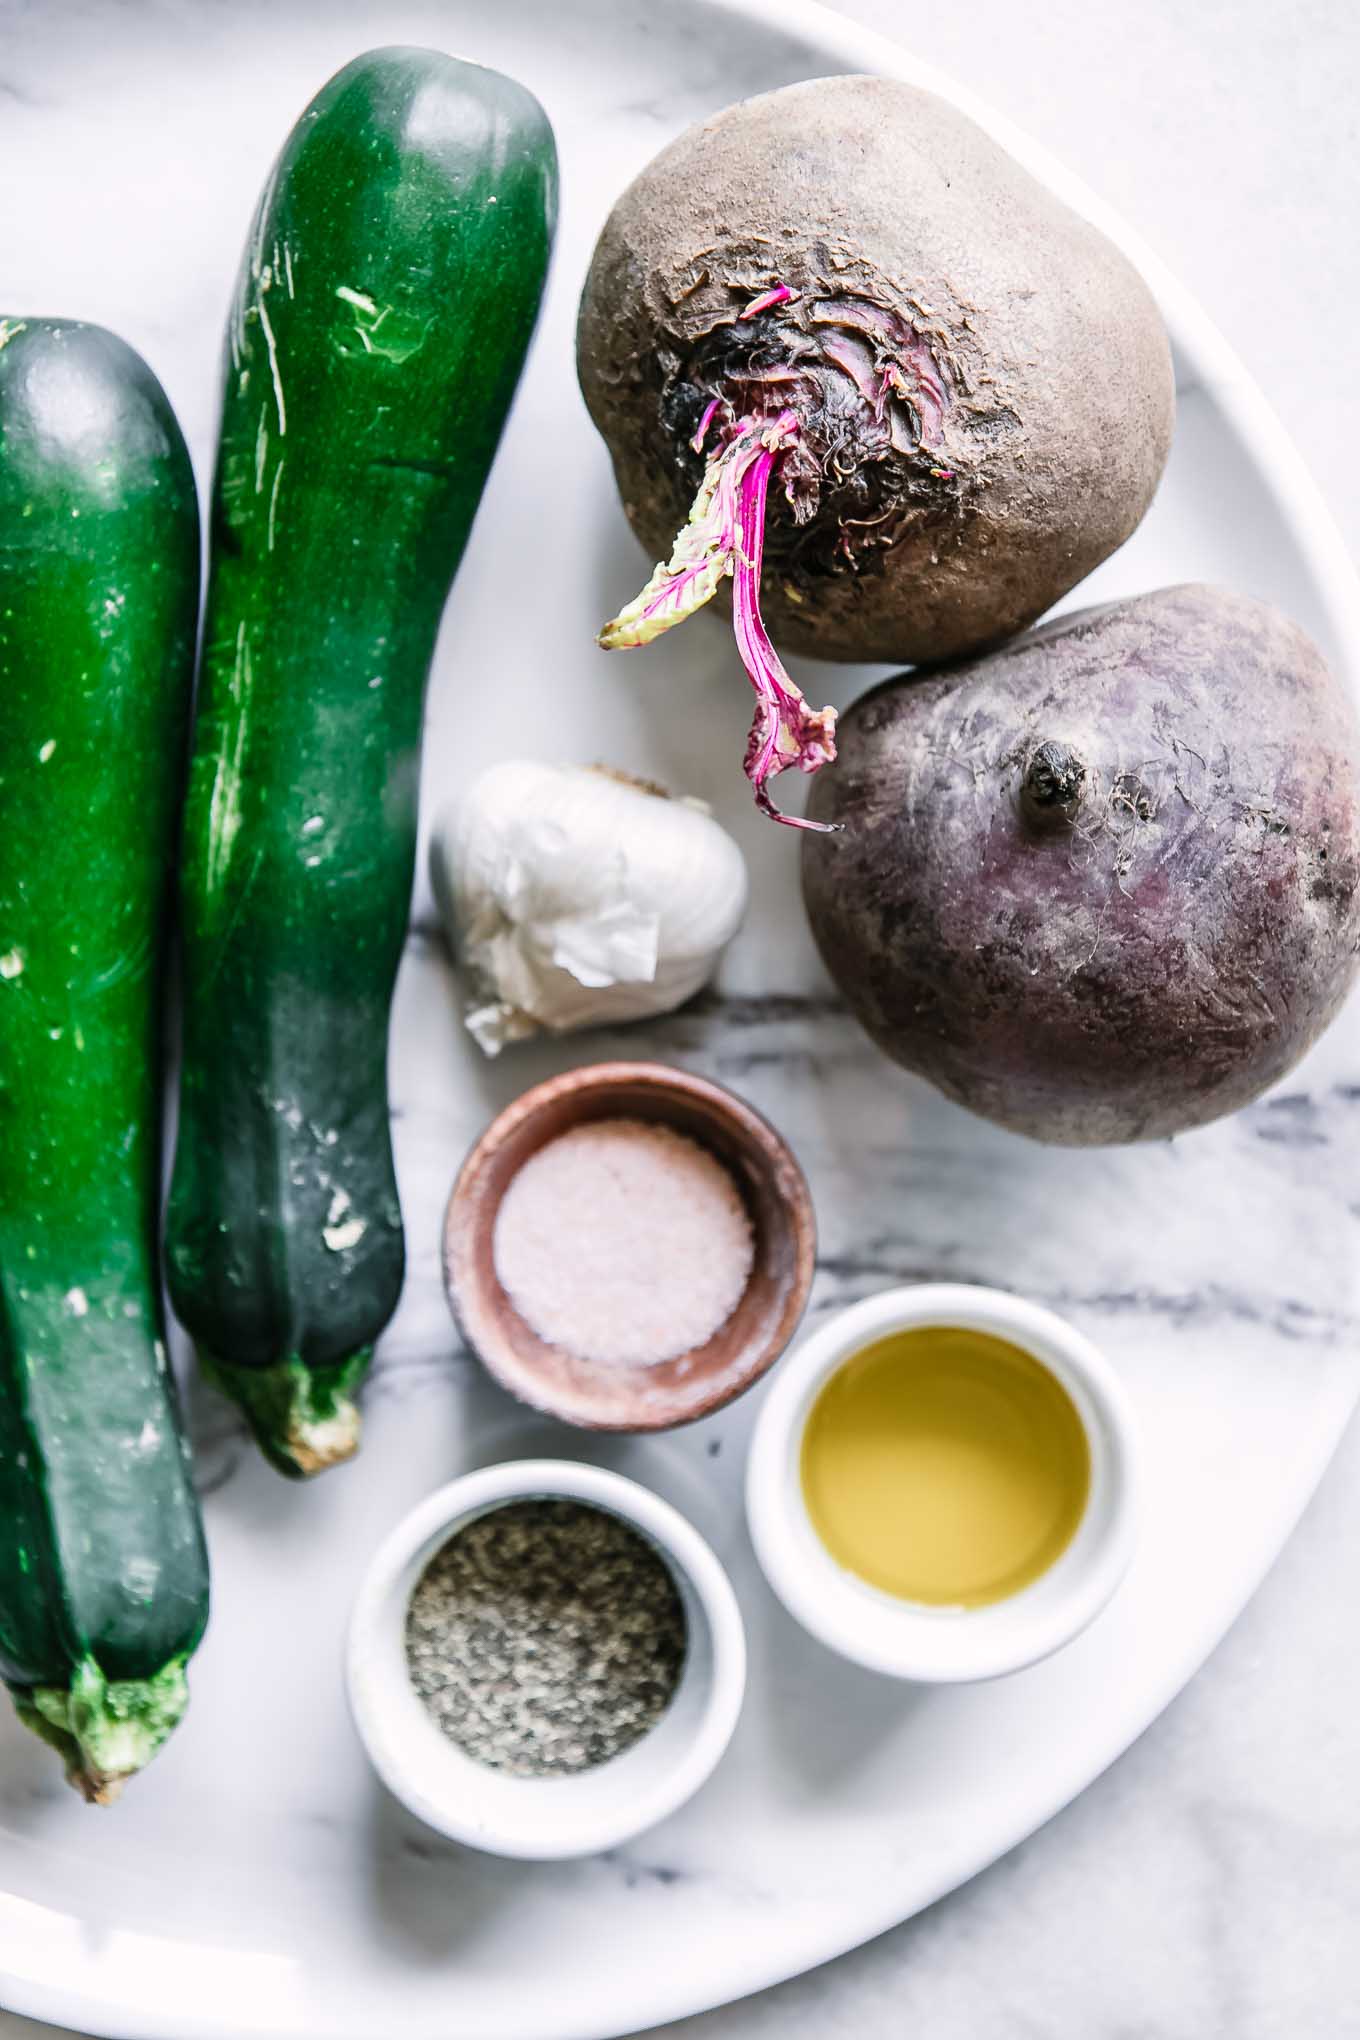 zucchini, red beets, garlic, and bowls of oil, salt, and pepper on a white table